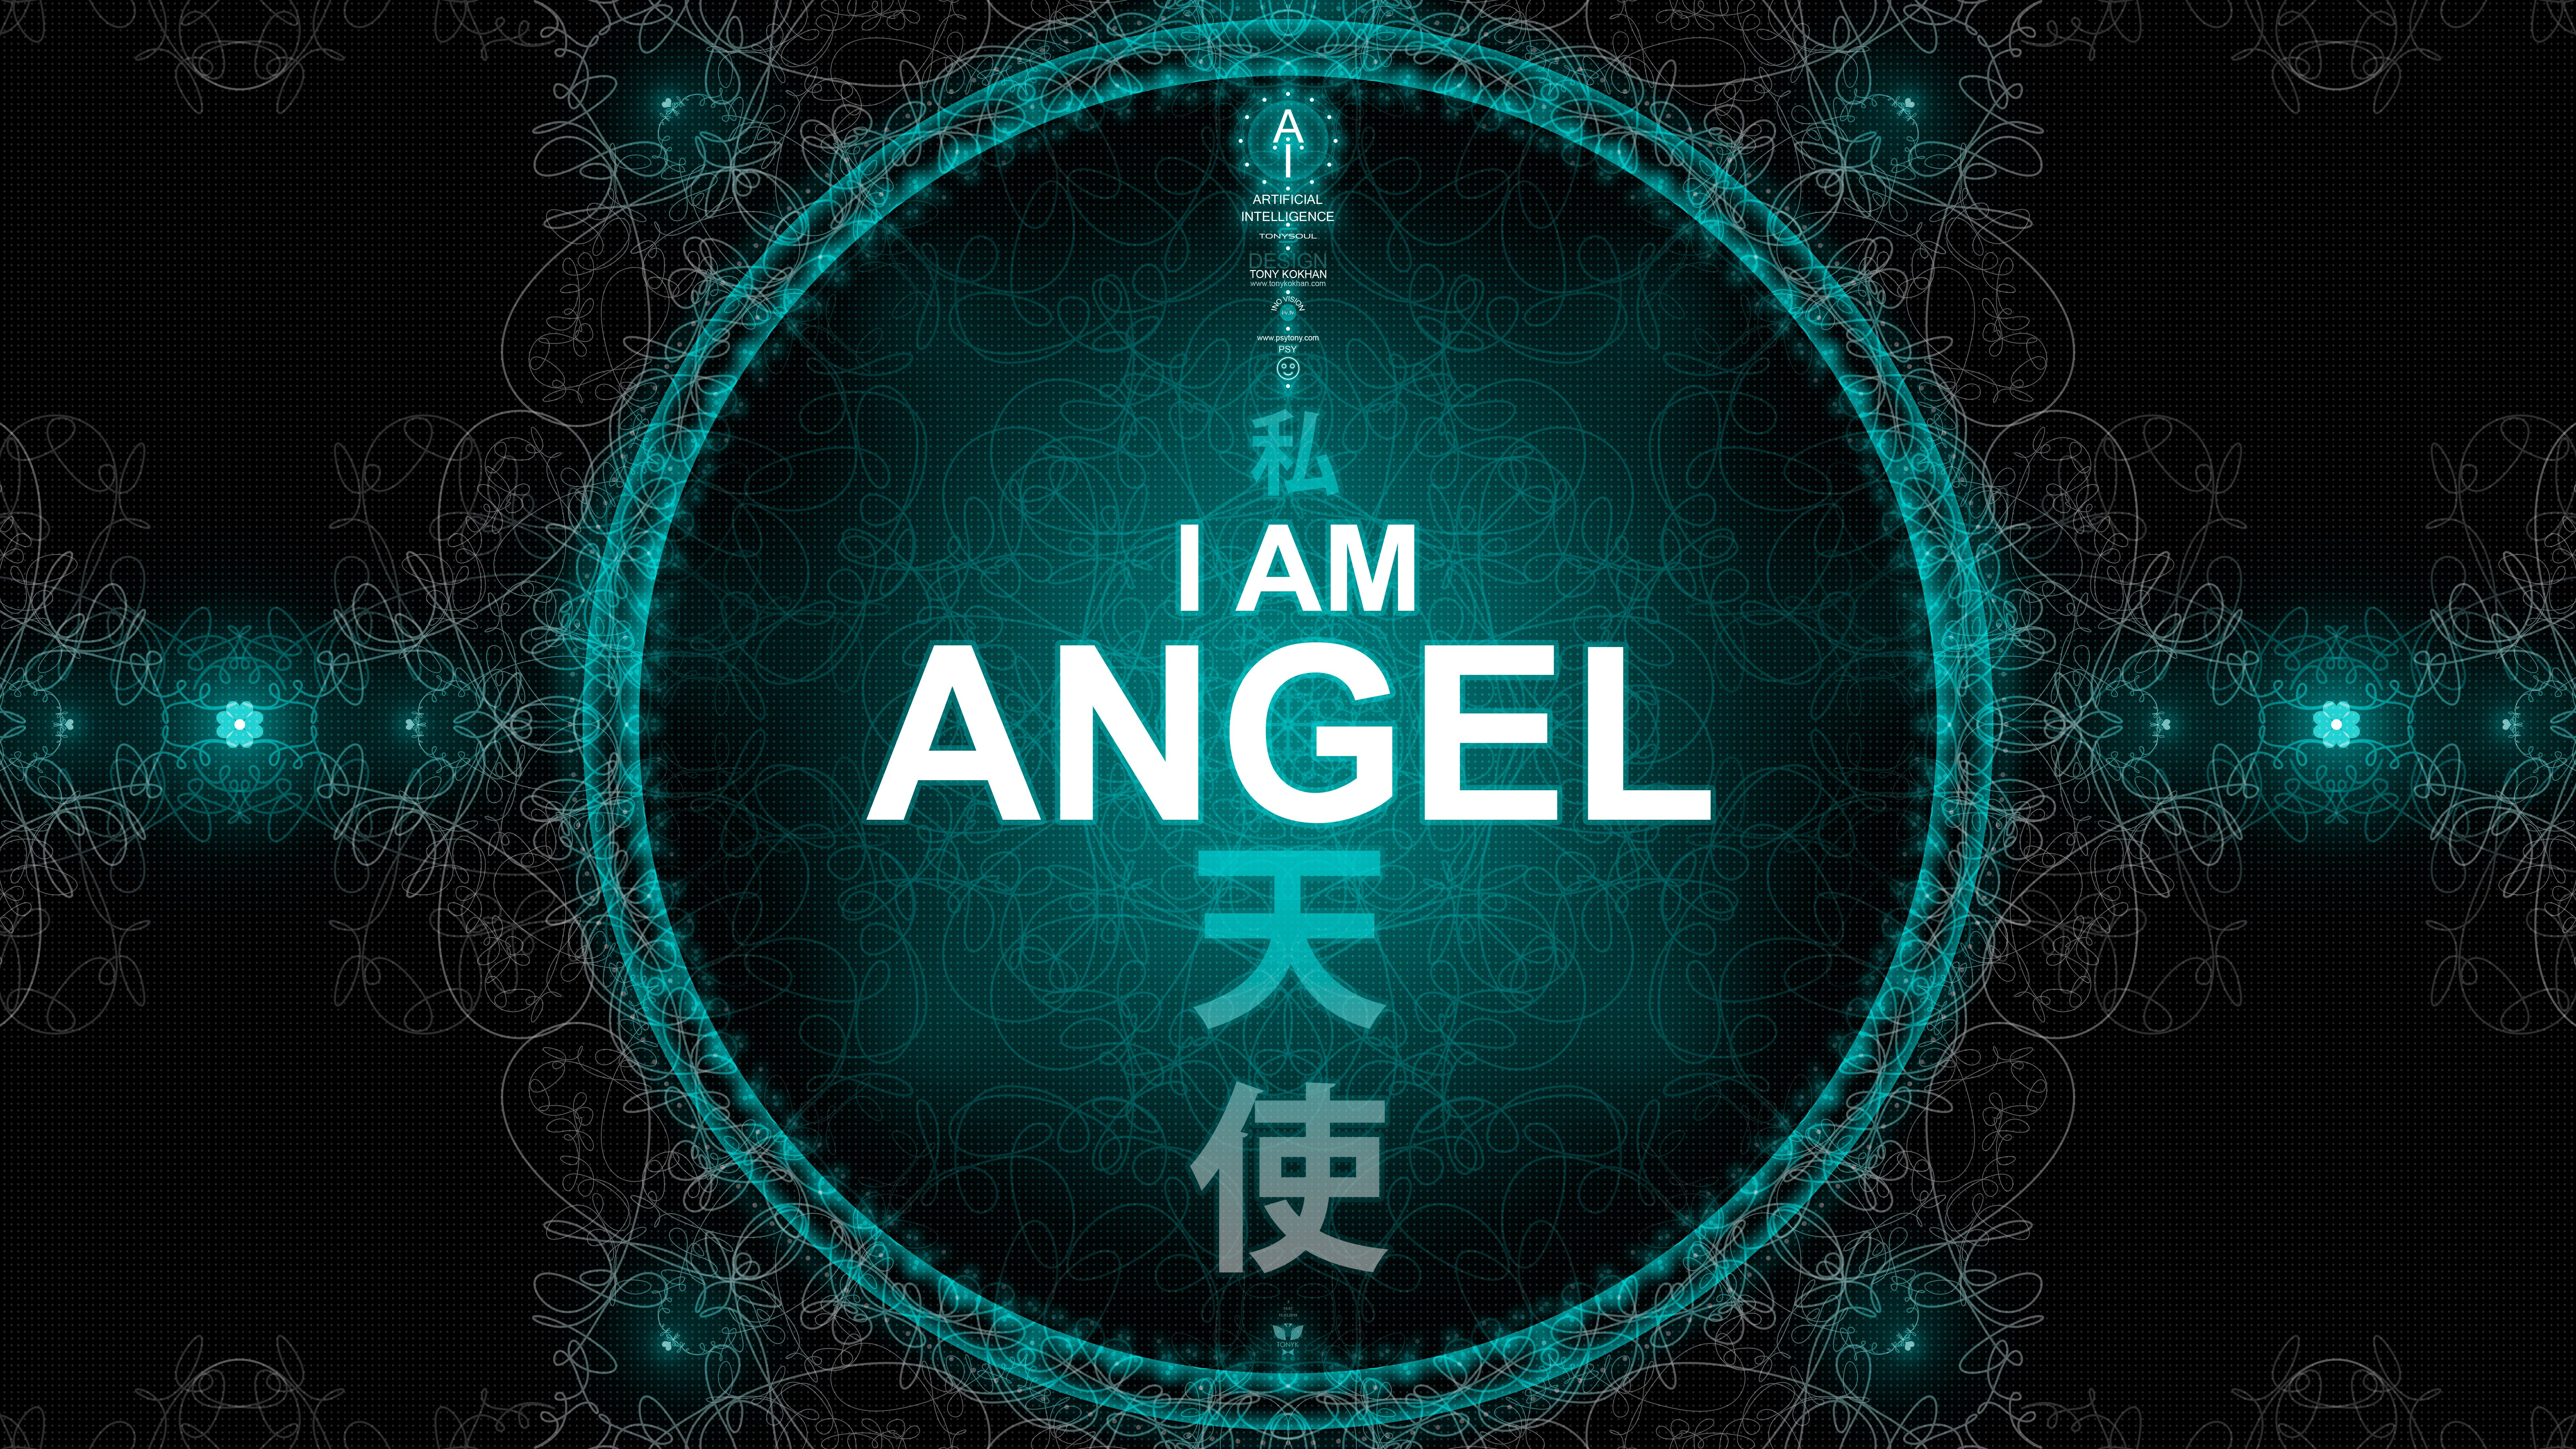 AI Artificial Intelligence 2 I AM ANGEL Digital Voice Super Abstract Circle Word Art Style 2019